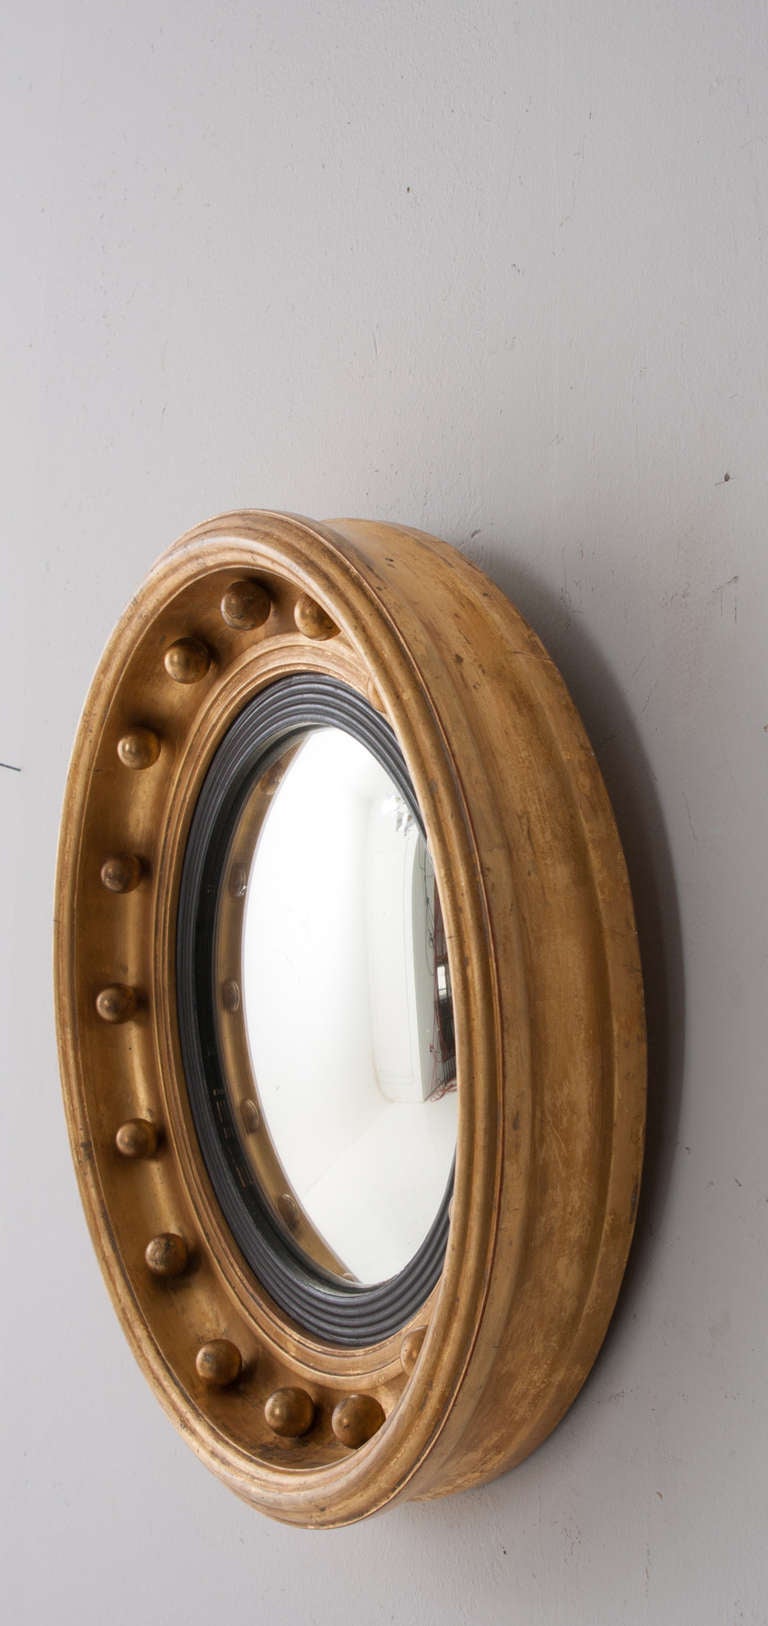 English convex mirror with gold gilt molded frame featuring round gilt balls, black ebonized and reeded frame holds in the mirror glass, 1920.